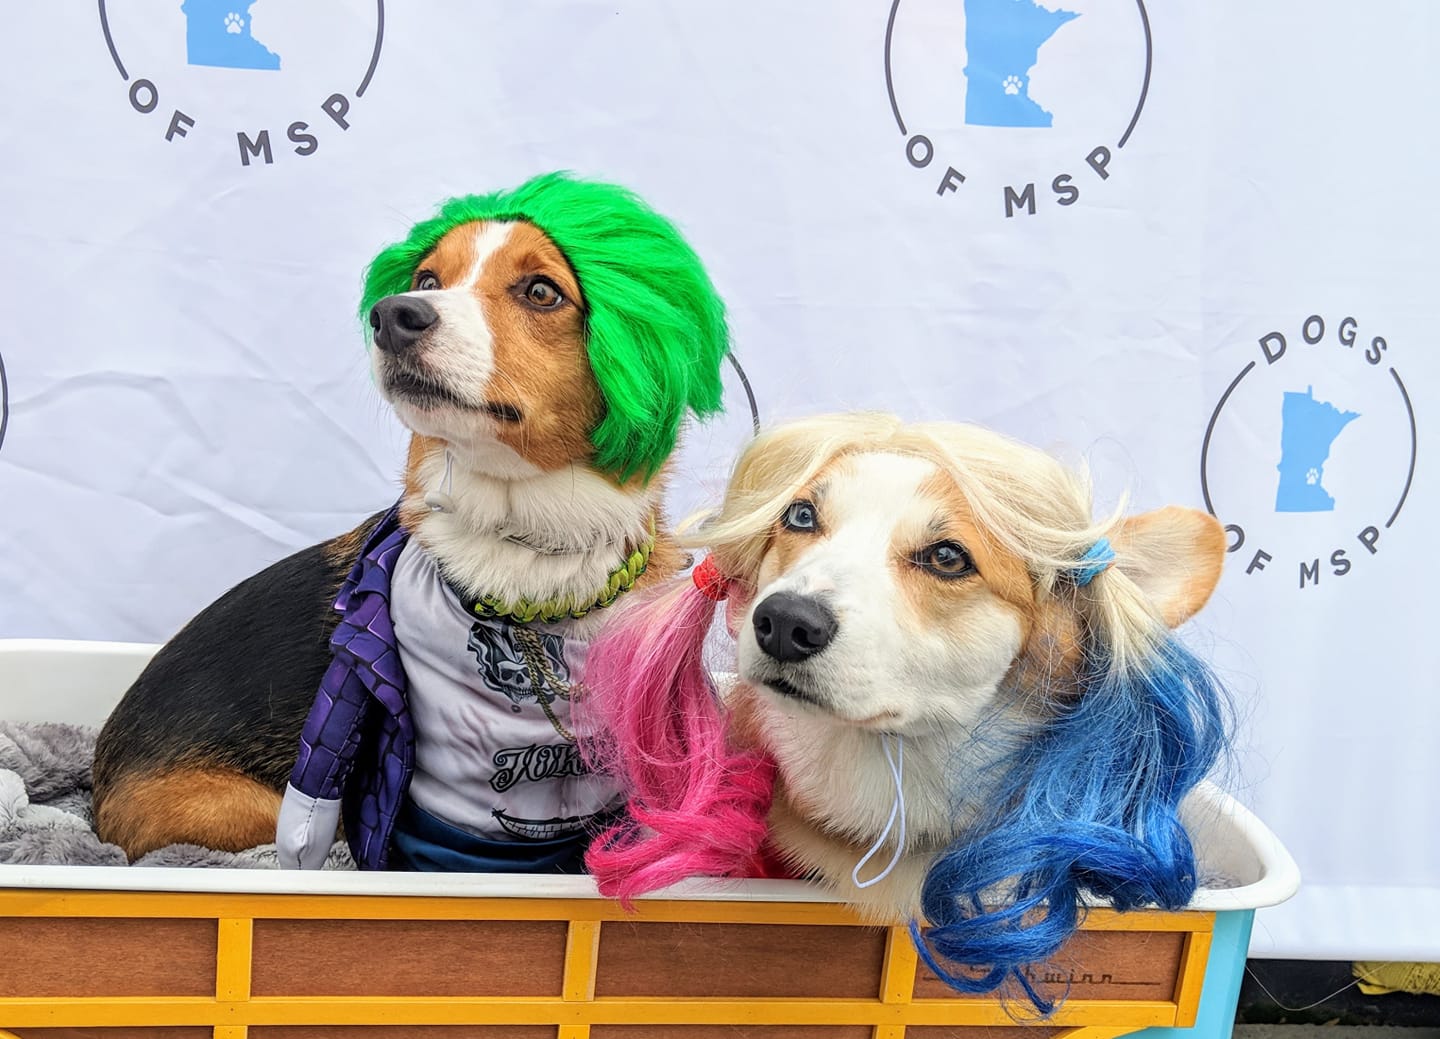 Two Corgis named Wigglebutt and Bubblebutt in their Joker and Harley Quinn costumes